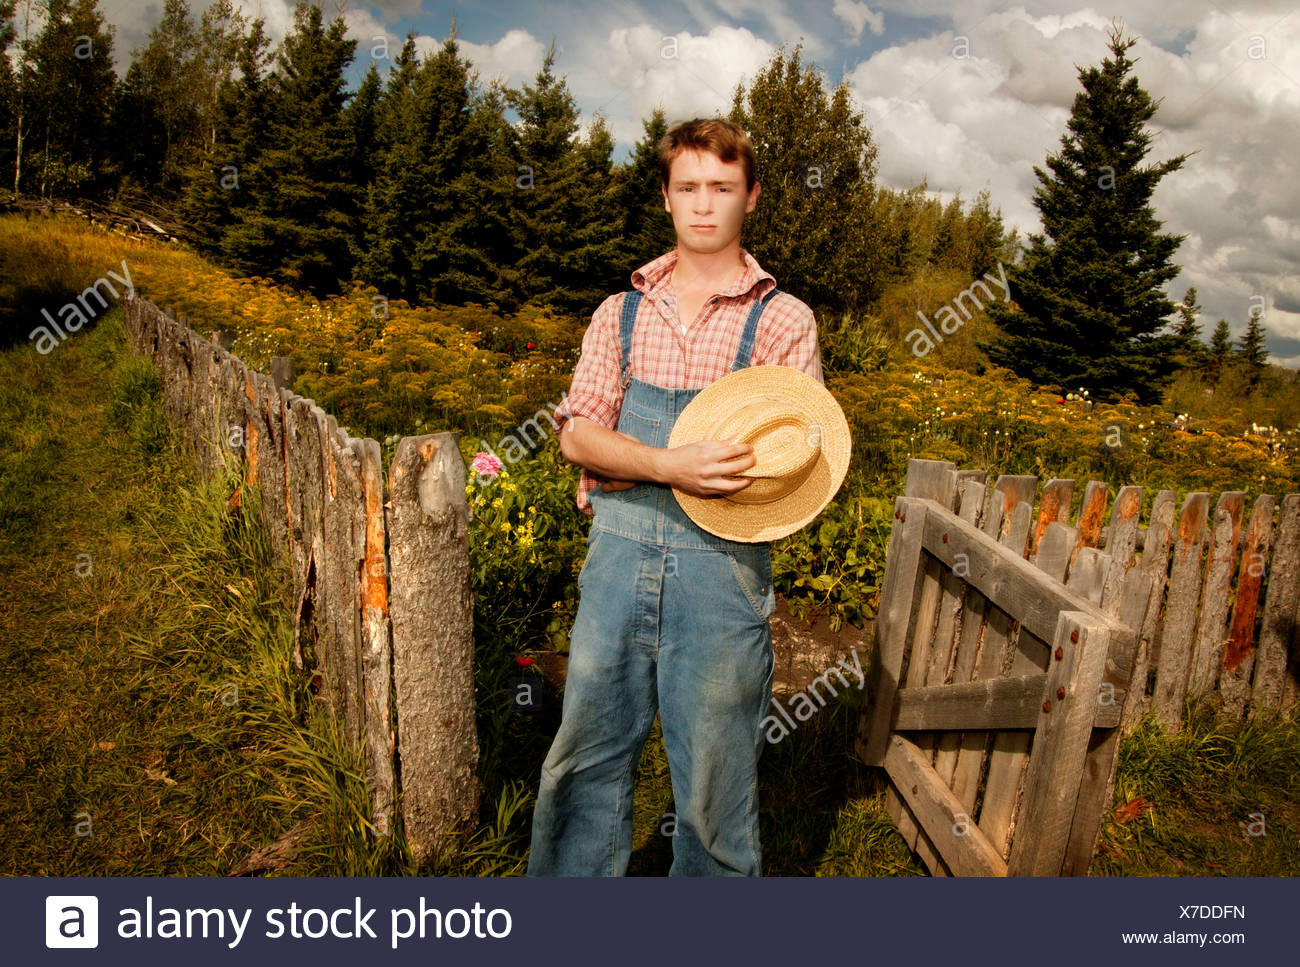 Boy in overalls with cowboy hat Stock Photo: 279964489 - Alamy